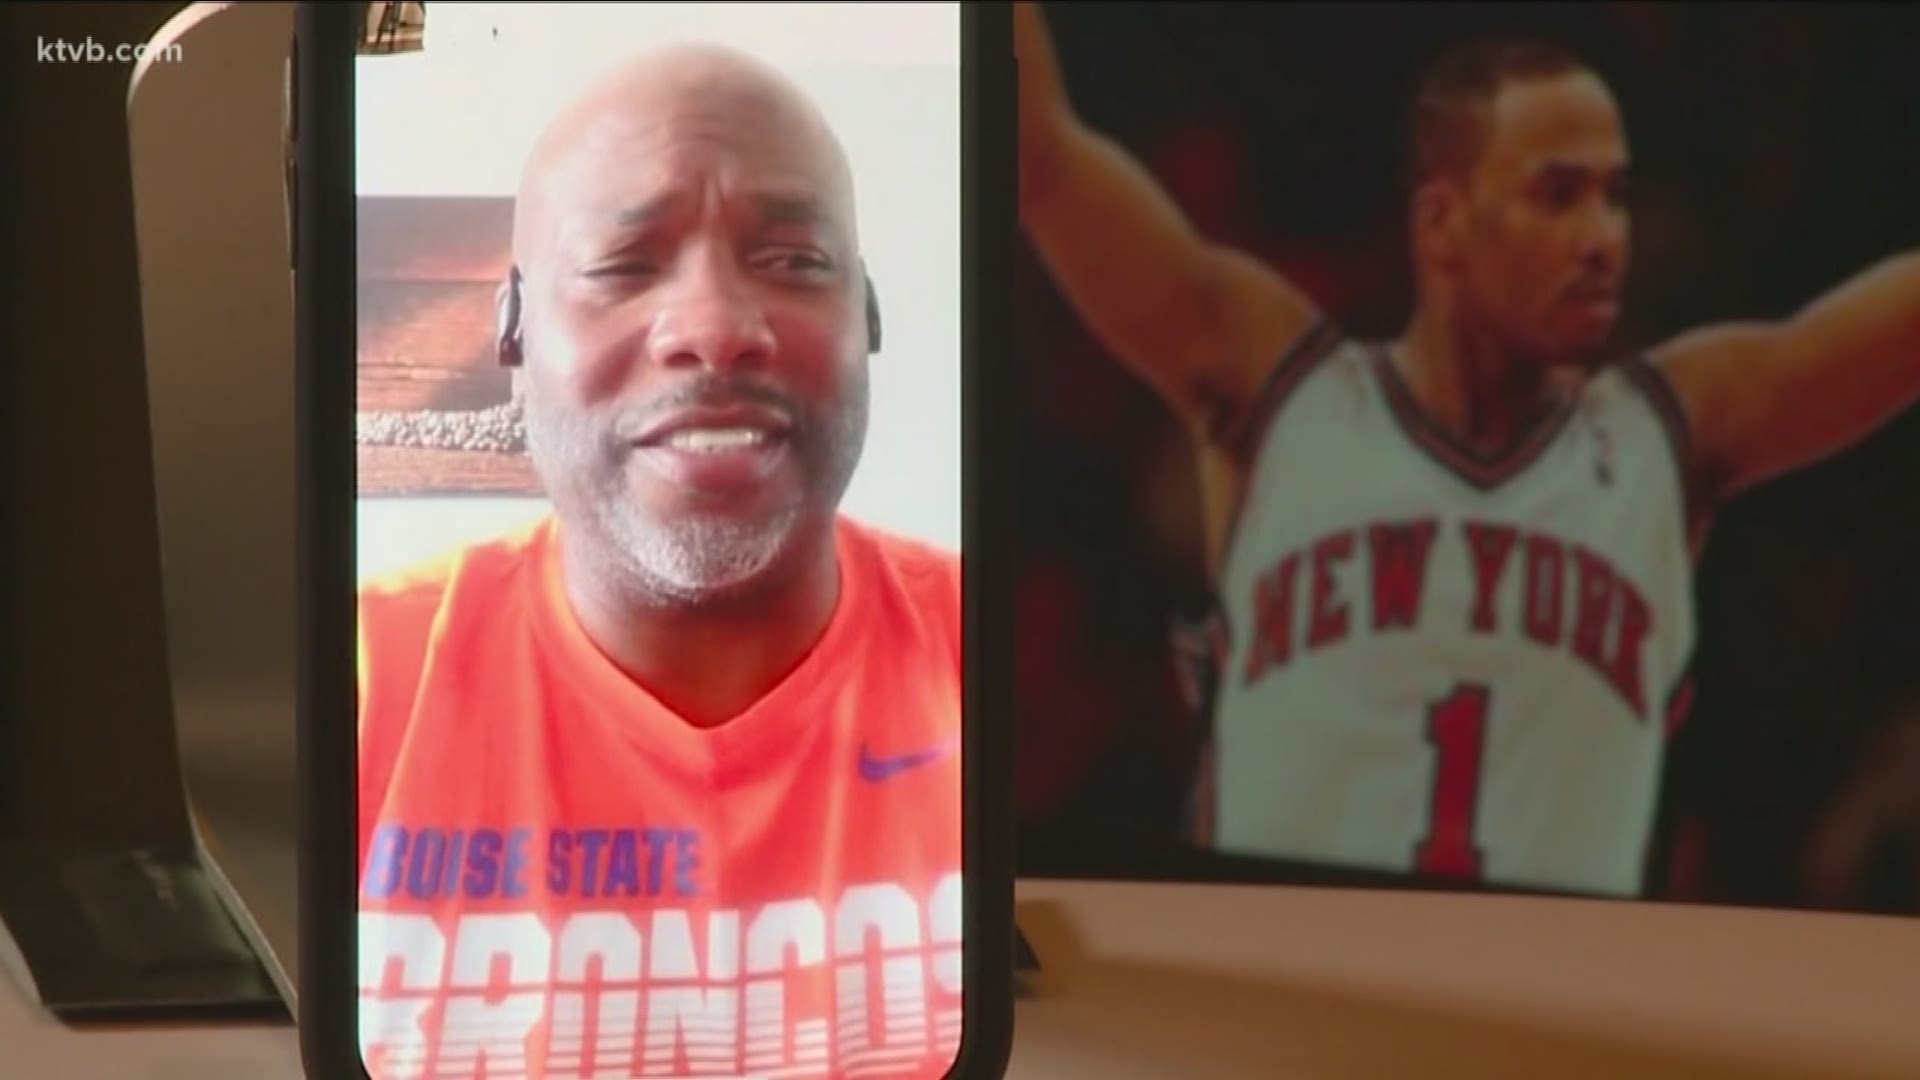 A look inside the rivalry between the Bulls & the Knicks as seen by former Knicks & Boise State basketball player Chris Childs; Borah alum on playing gold with MJ.